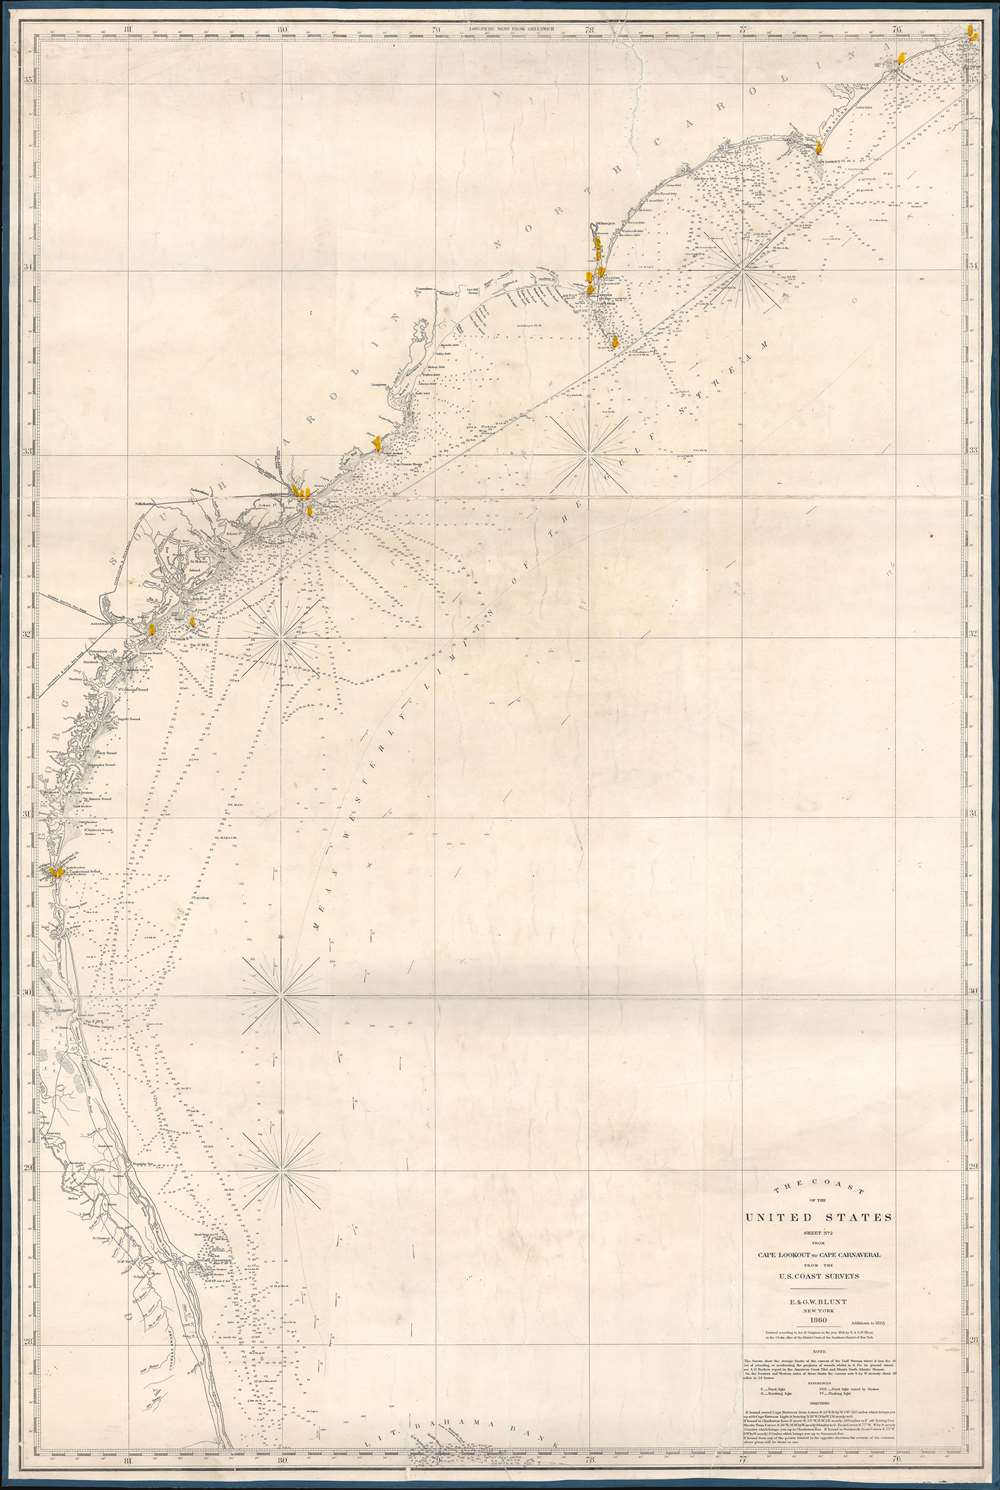 The Coast of the United States Sheet No. 2 from Cape Lookout to Cape Carnaveral from the U.S. Coast Survey. - Main View